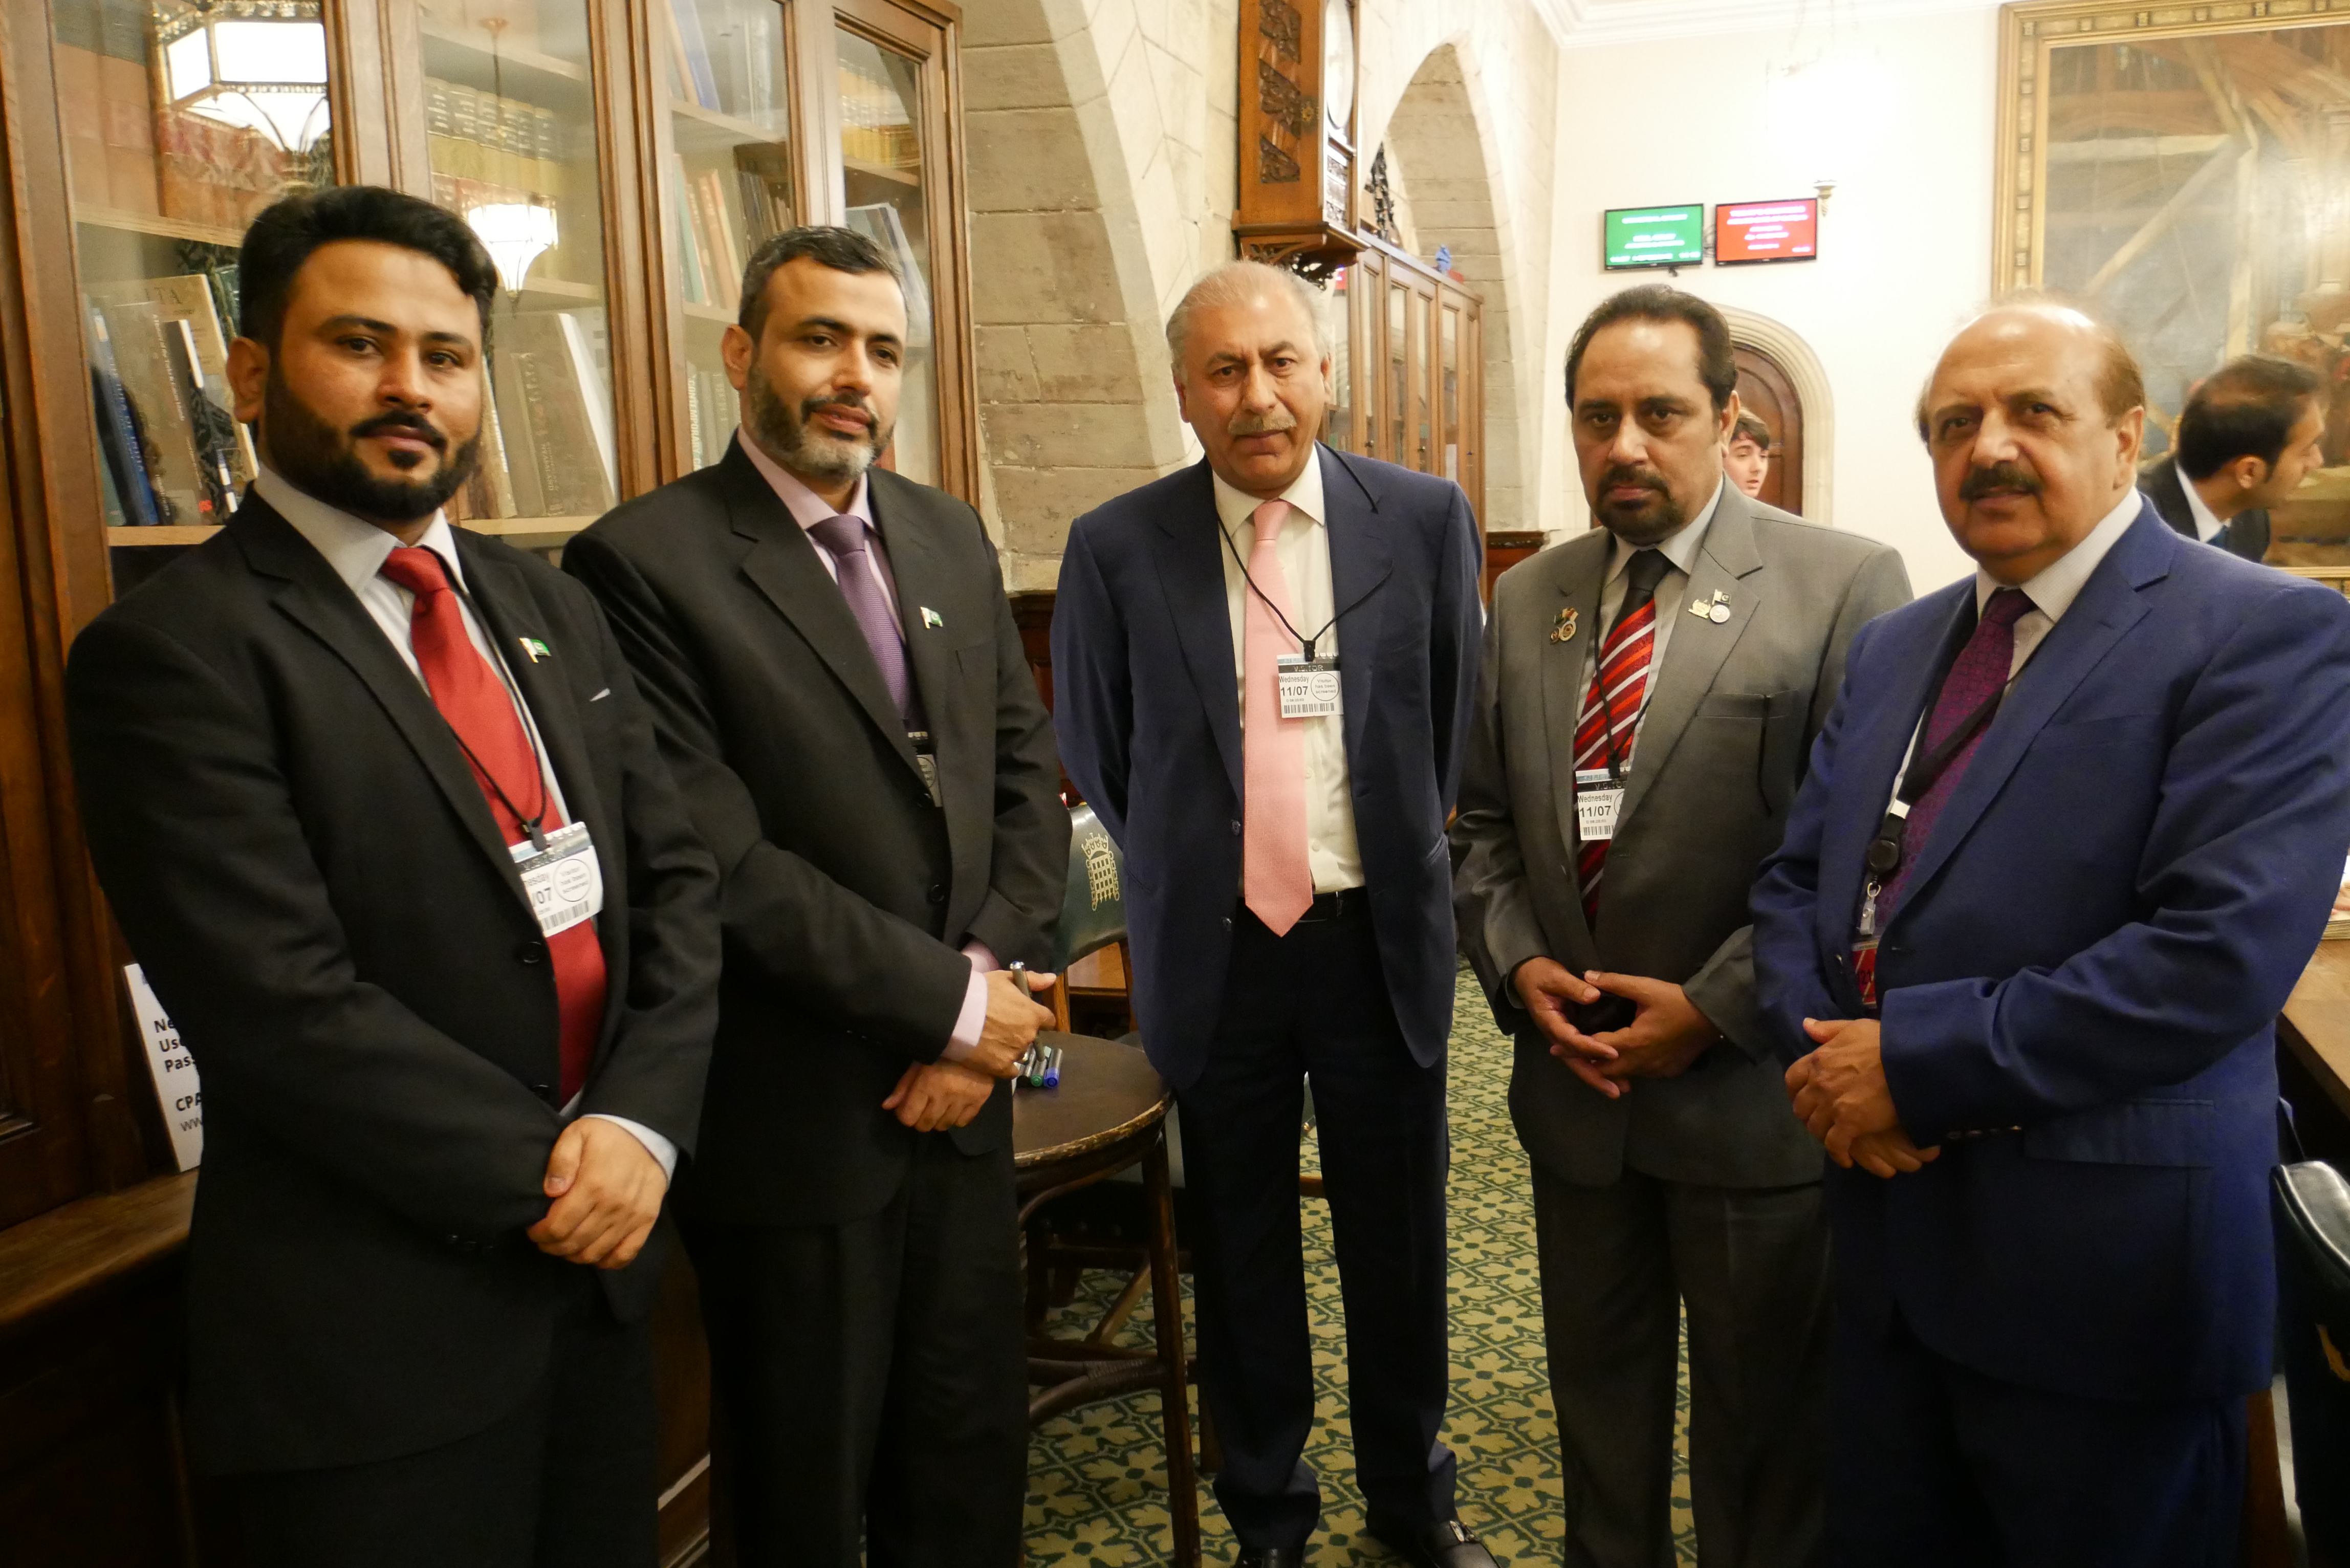 l.t.r.: Asghar Ali Mahar, Protocol Officer; Major Syed Hasnain Haider, Accompanying Secretary; Senator Mohsin Aziz Khan, Chair, Senate Standing Committee (SSC) on Petroleum; Senator Mian Muhammad Ateeq Shaikh, Chair, SSC on National Health Services Regulations and Coordination; Lord Hussain, Vice Chair, All-Party Parliamentary Group on Pakistan Not pictured: Senator Muhammad Javed Abbasi, Chair, SSC on Law and Justice